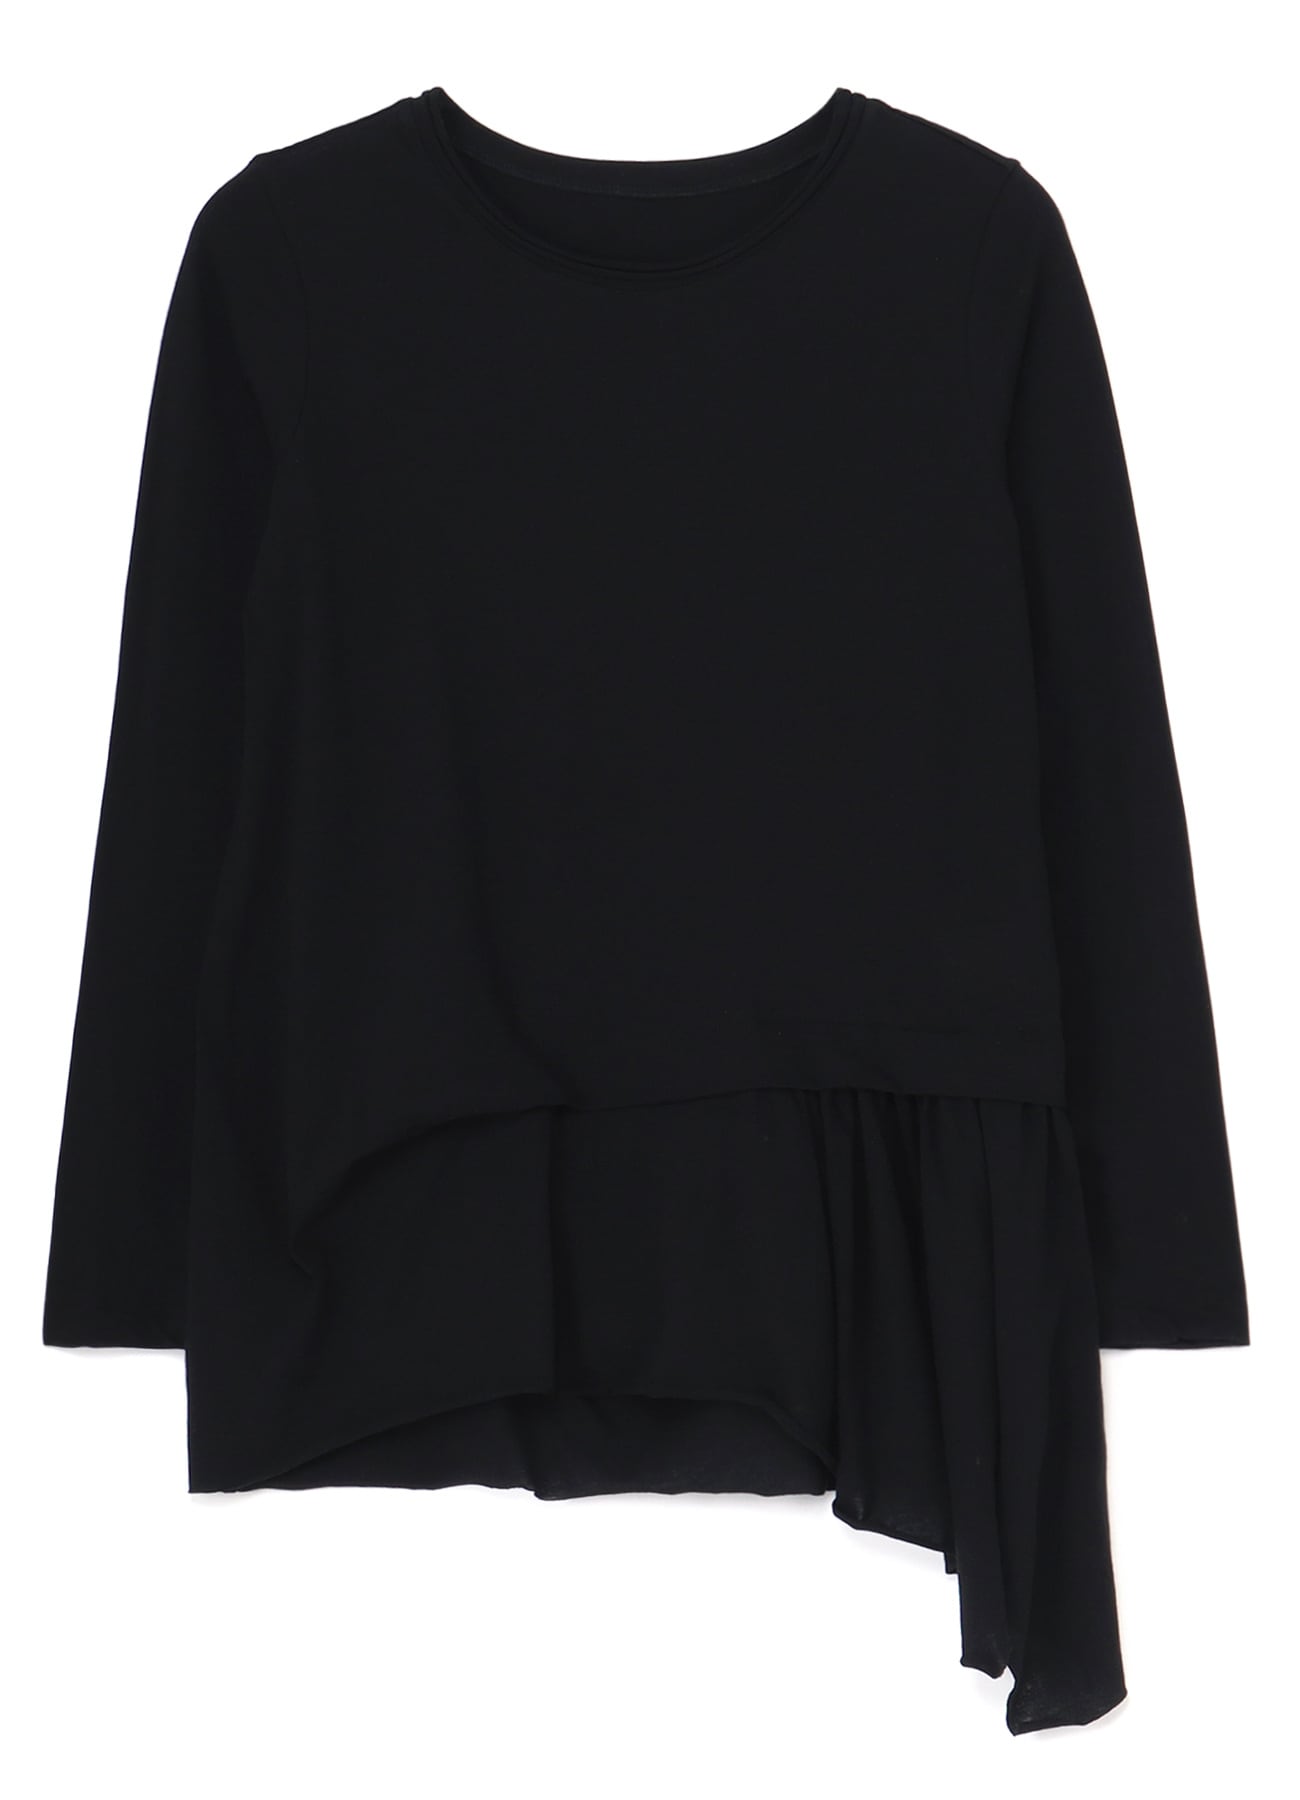 COTTON JERSEY SIDE FLARE LONG SLEEVE T